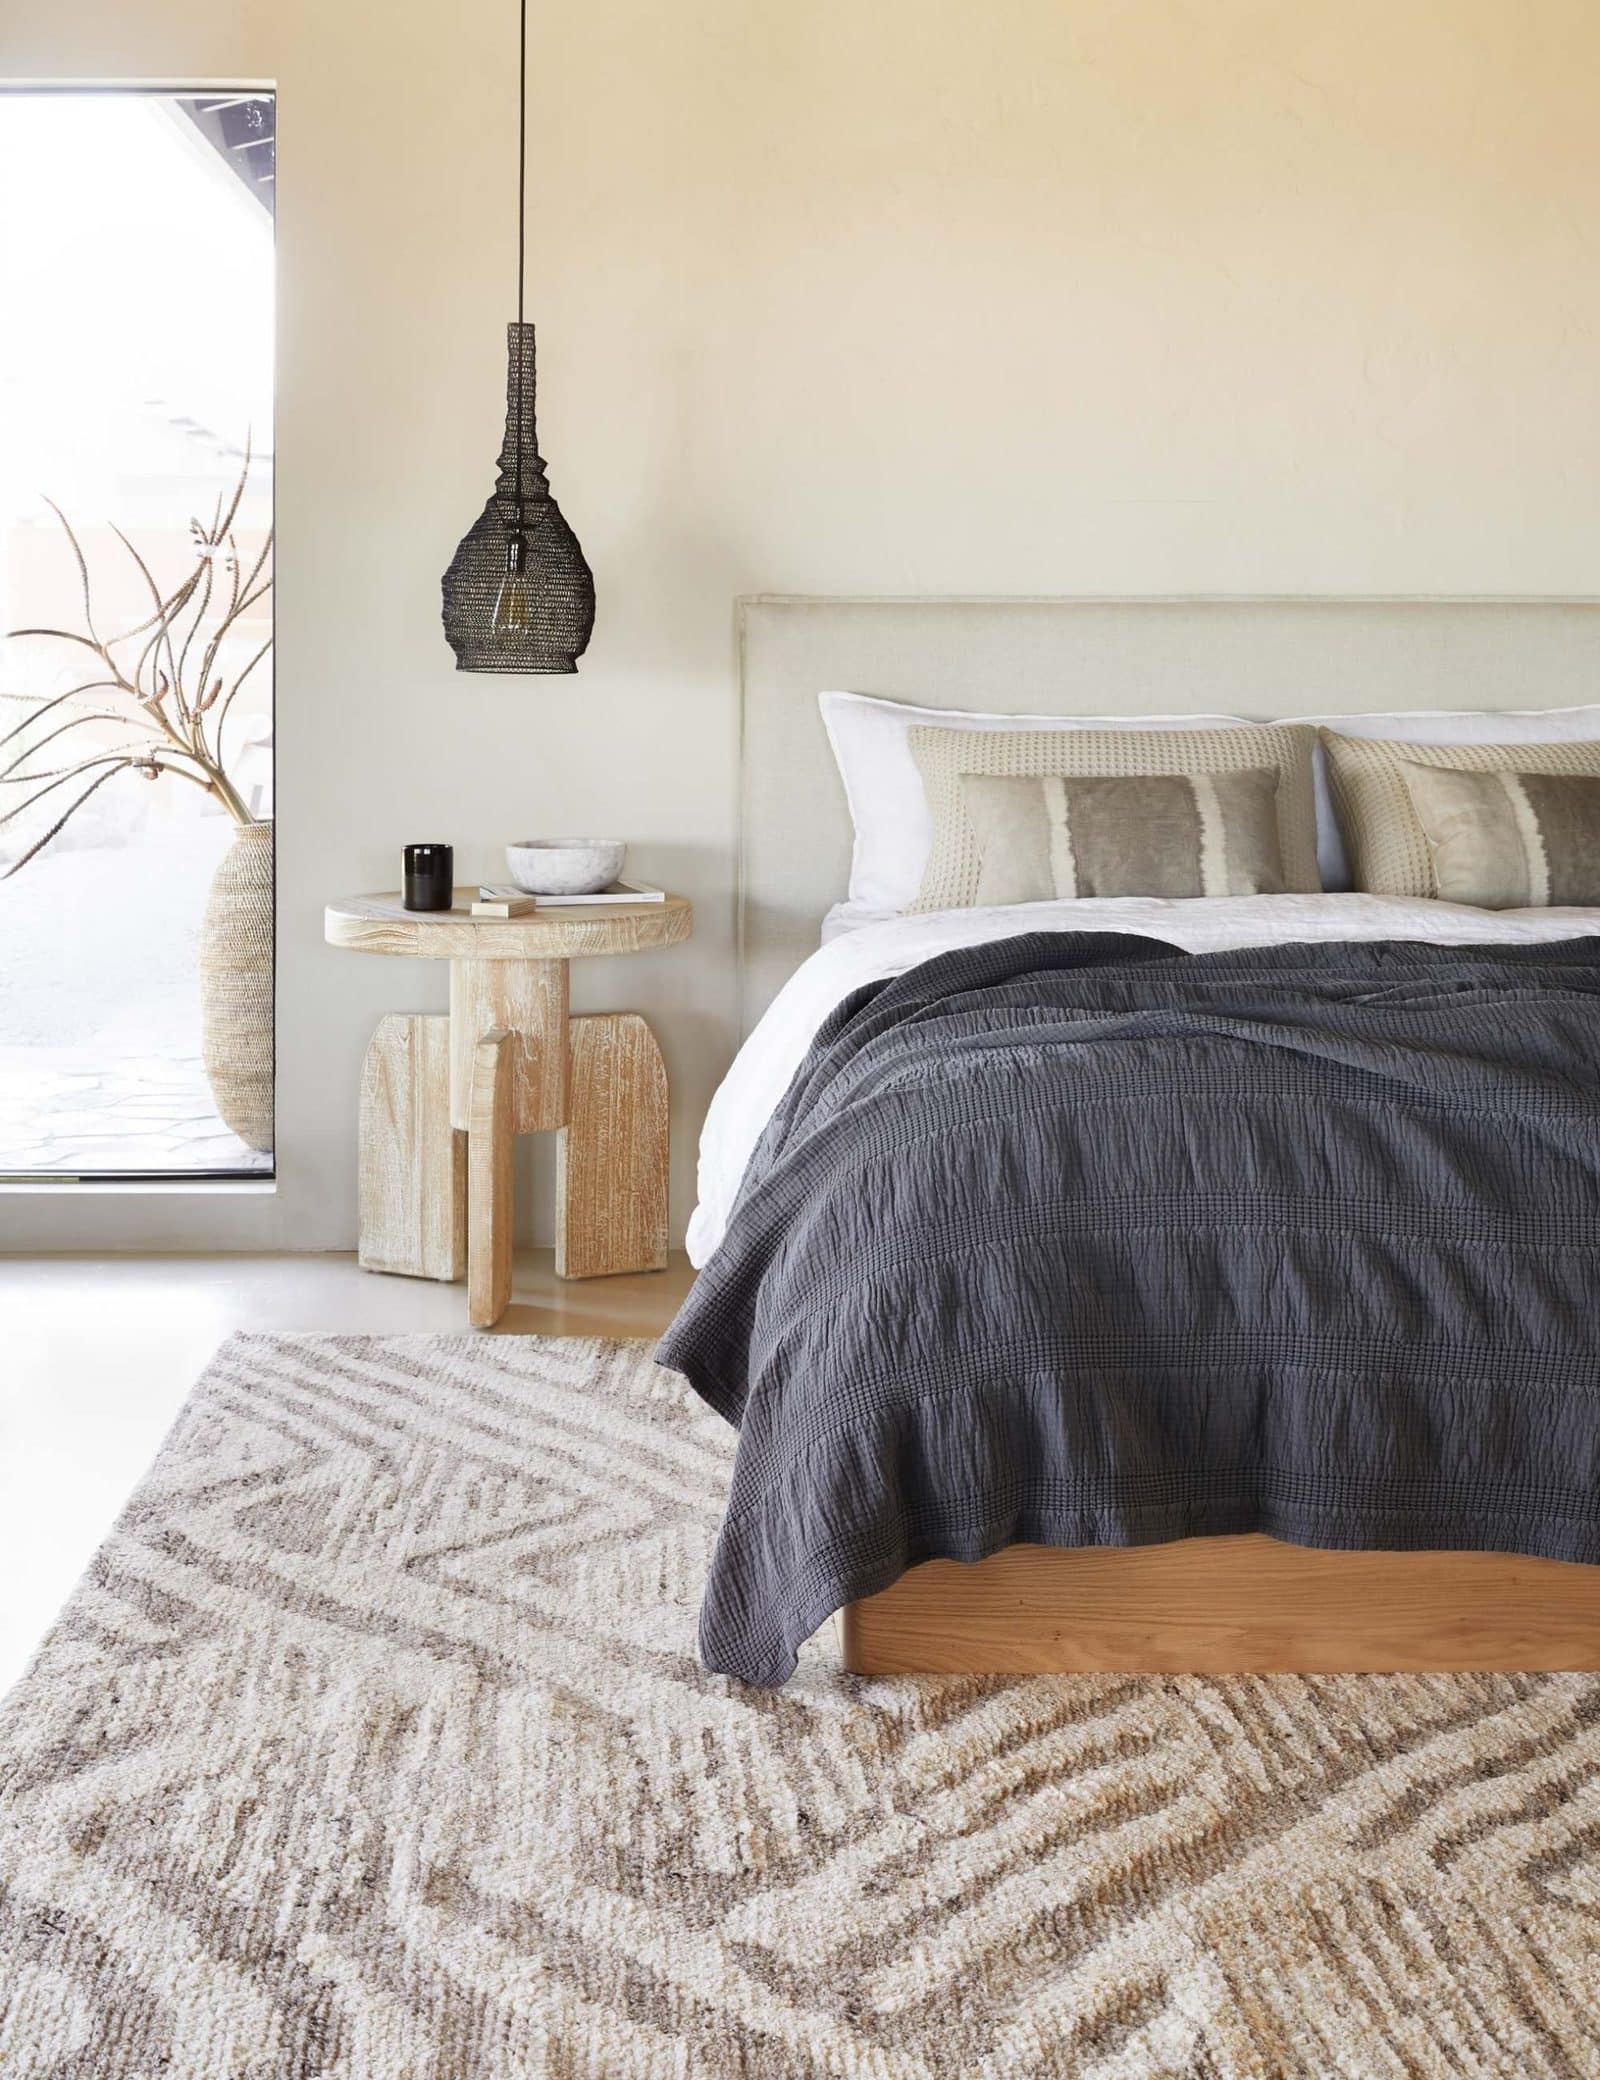 Manic for Bedding in Textured Midnight